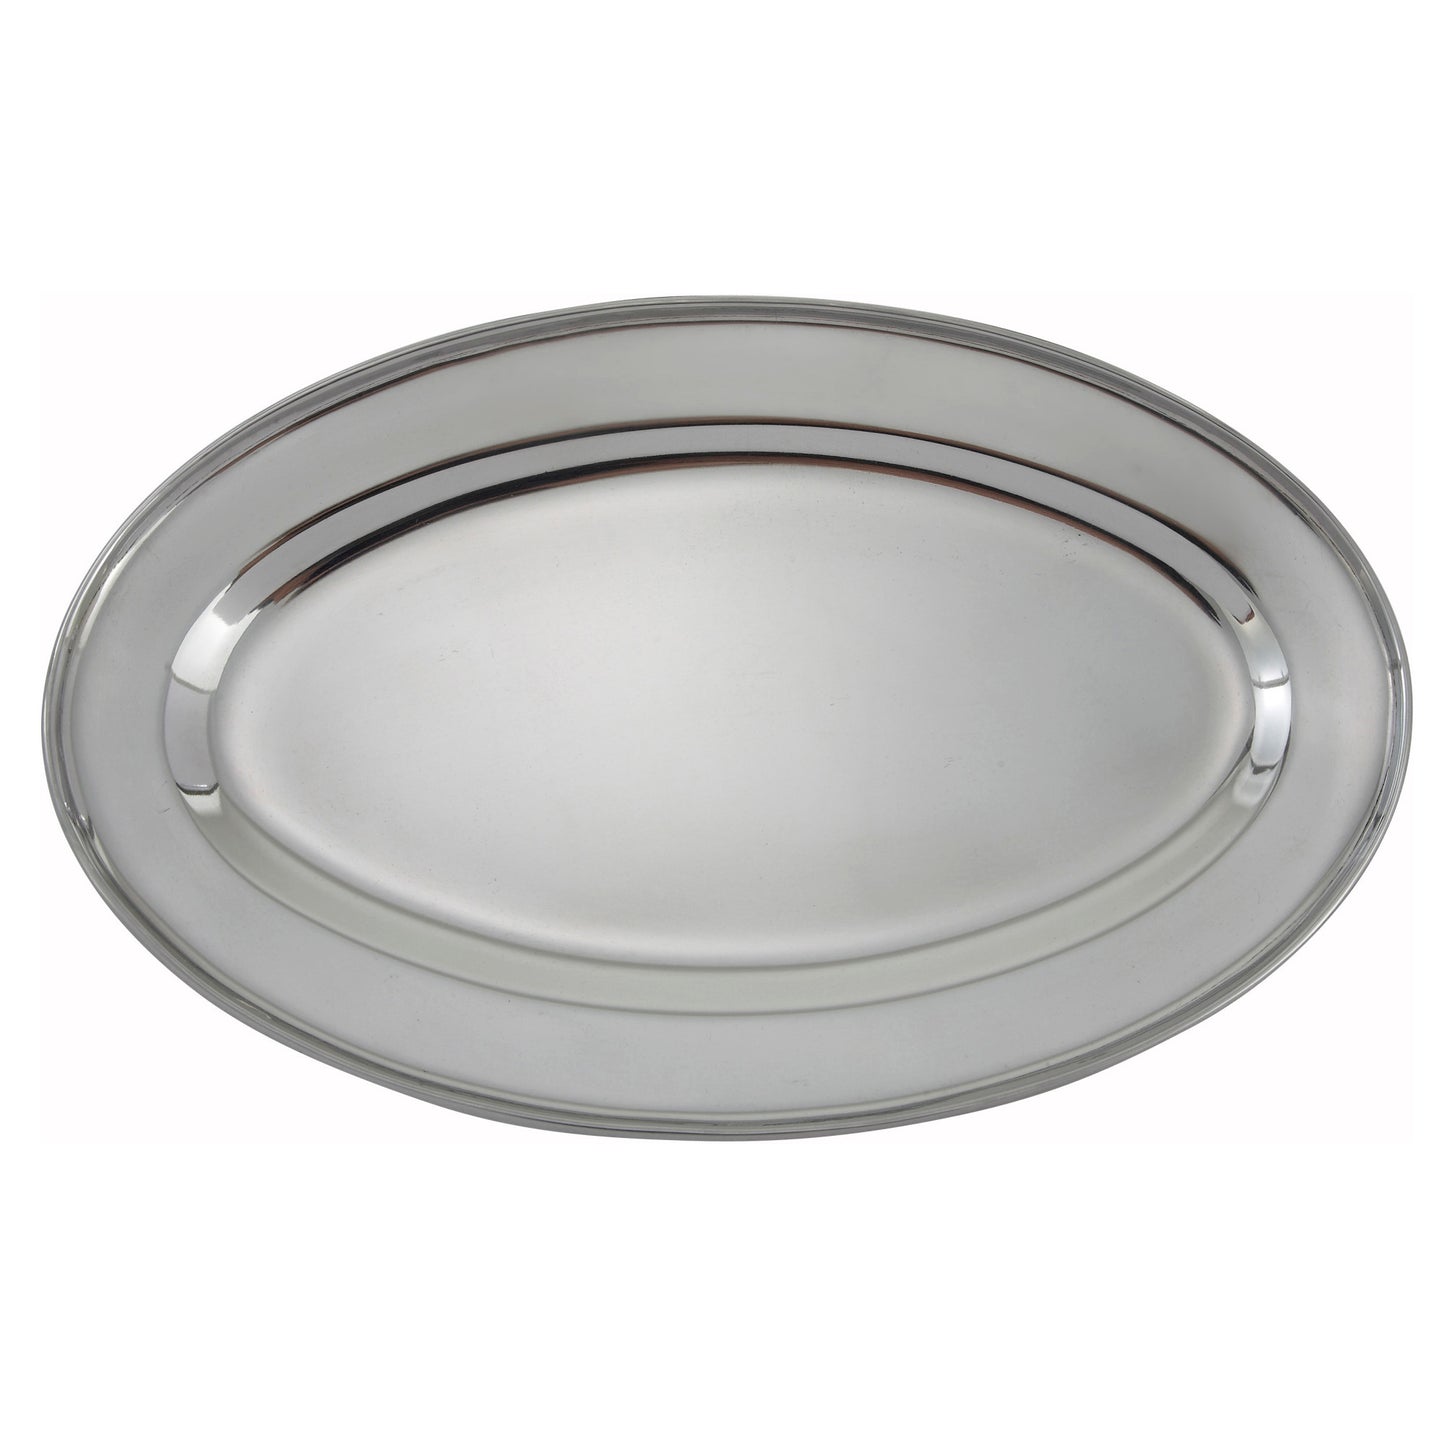 OPL-16 - Oval Platter, Stainless Steel - 16"